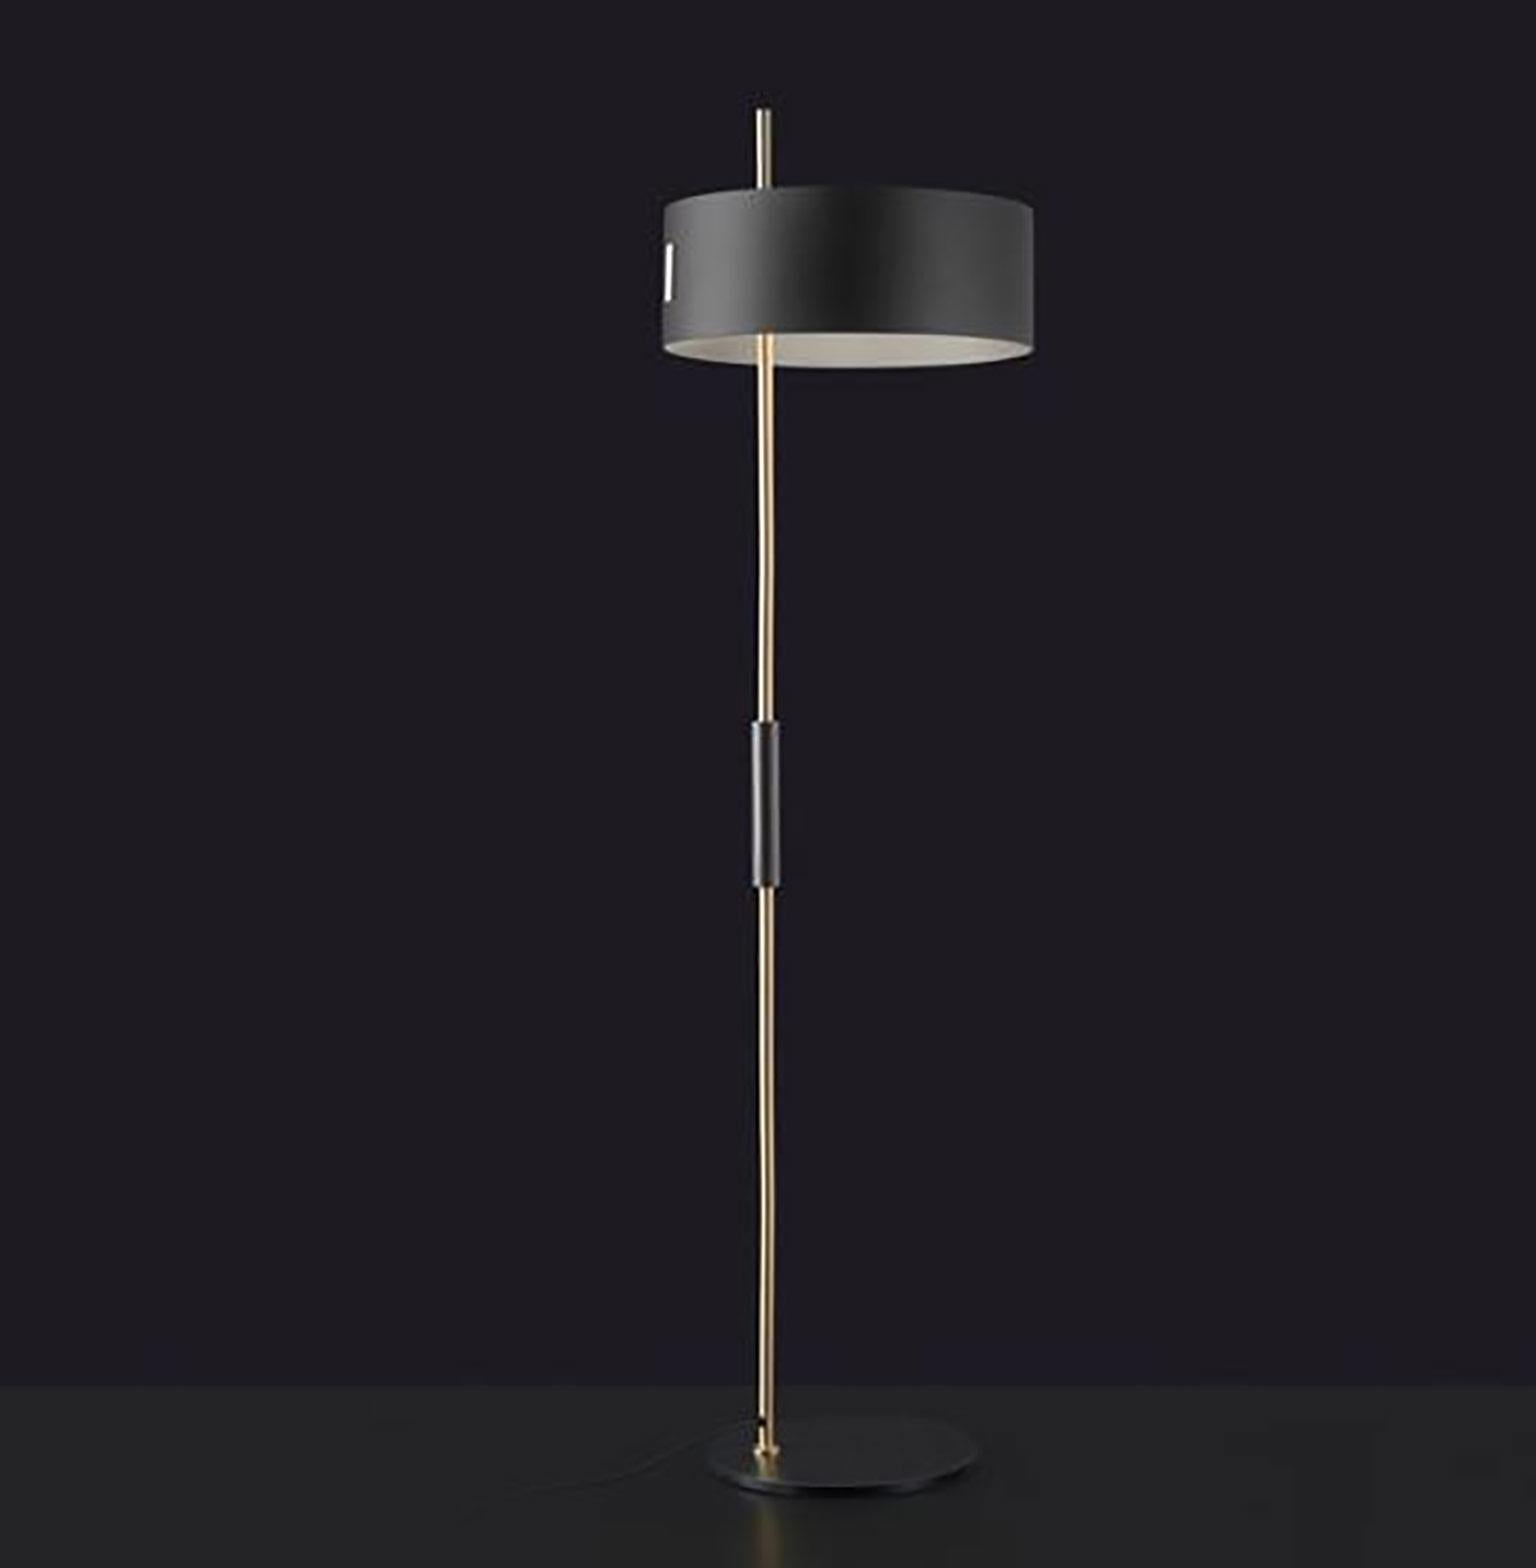 1953 floor lamp by Ostuni & Forti for Oluce. The lamp 1953 designed by Ostuni & Forti, elegantly recalls the style of those years, such as the use of a shade in the Classic cylindrical shape and the fine contrast of the satin gold stem and shade’s